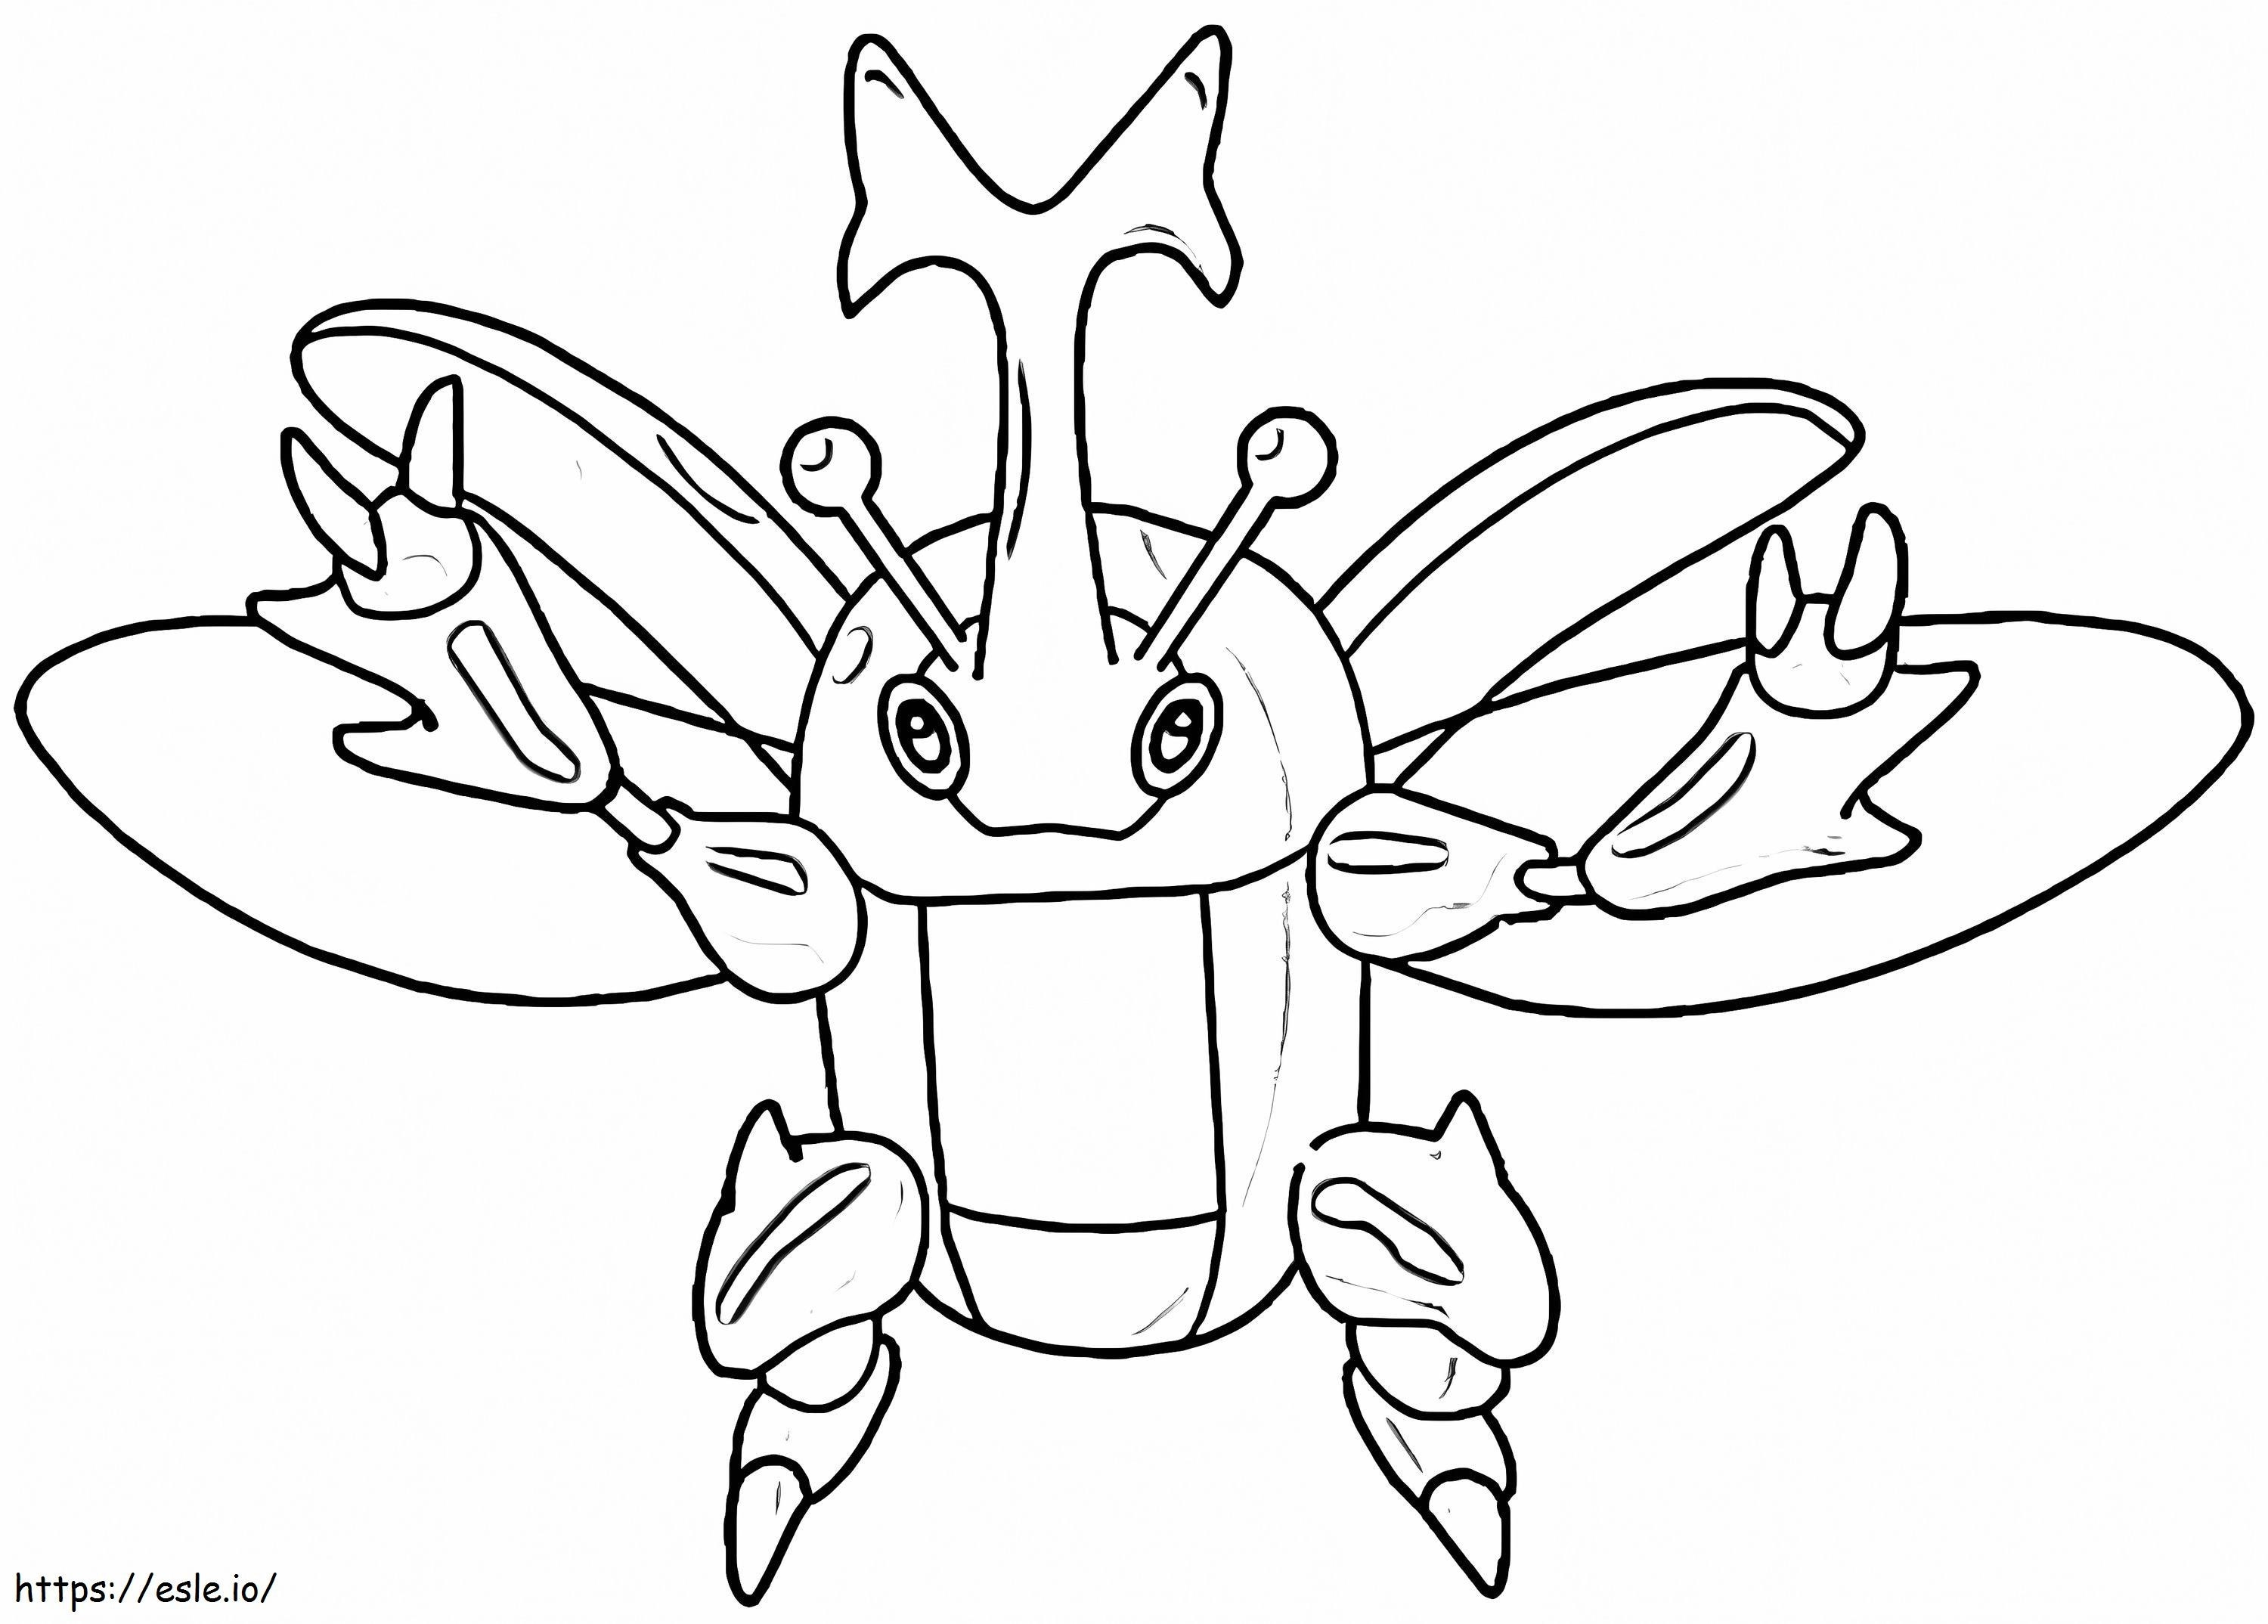 Awesome Pokemon Heracross coloring page